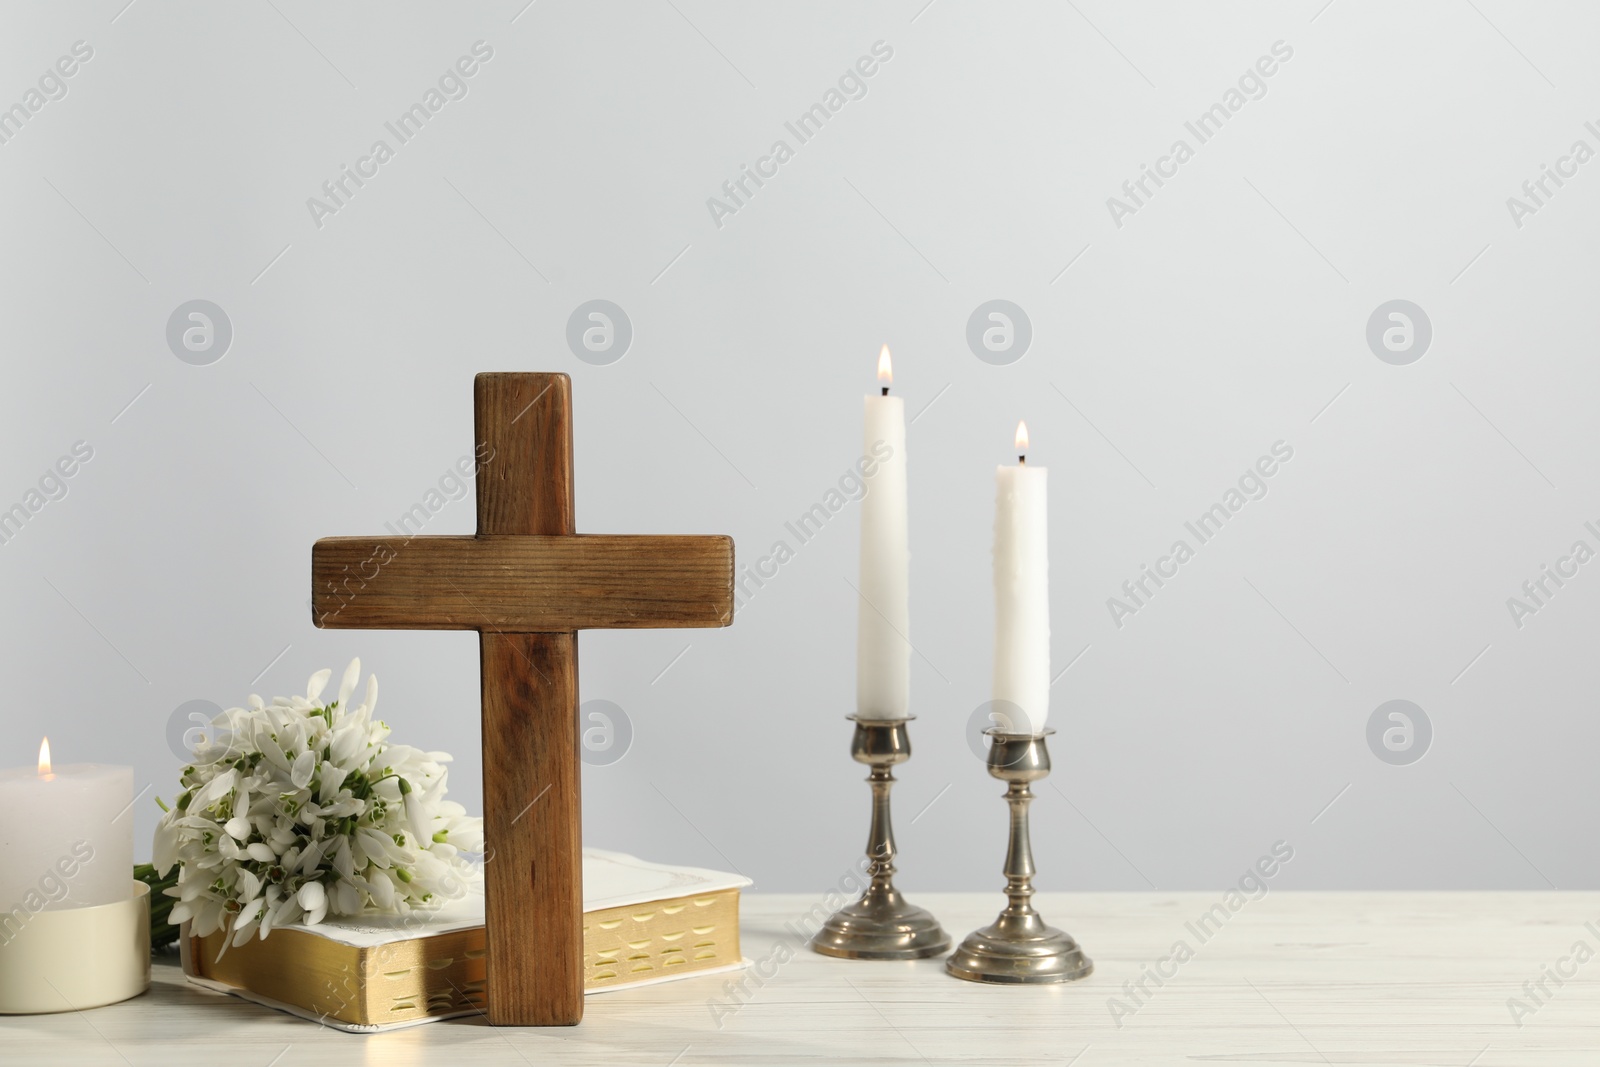 Photo of Burning church candles, wooden cross, Bible and flowers on white table. Space for text